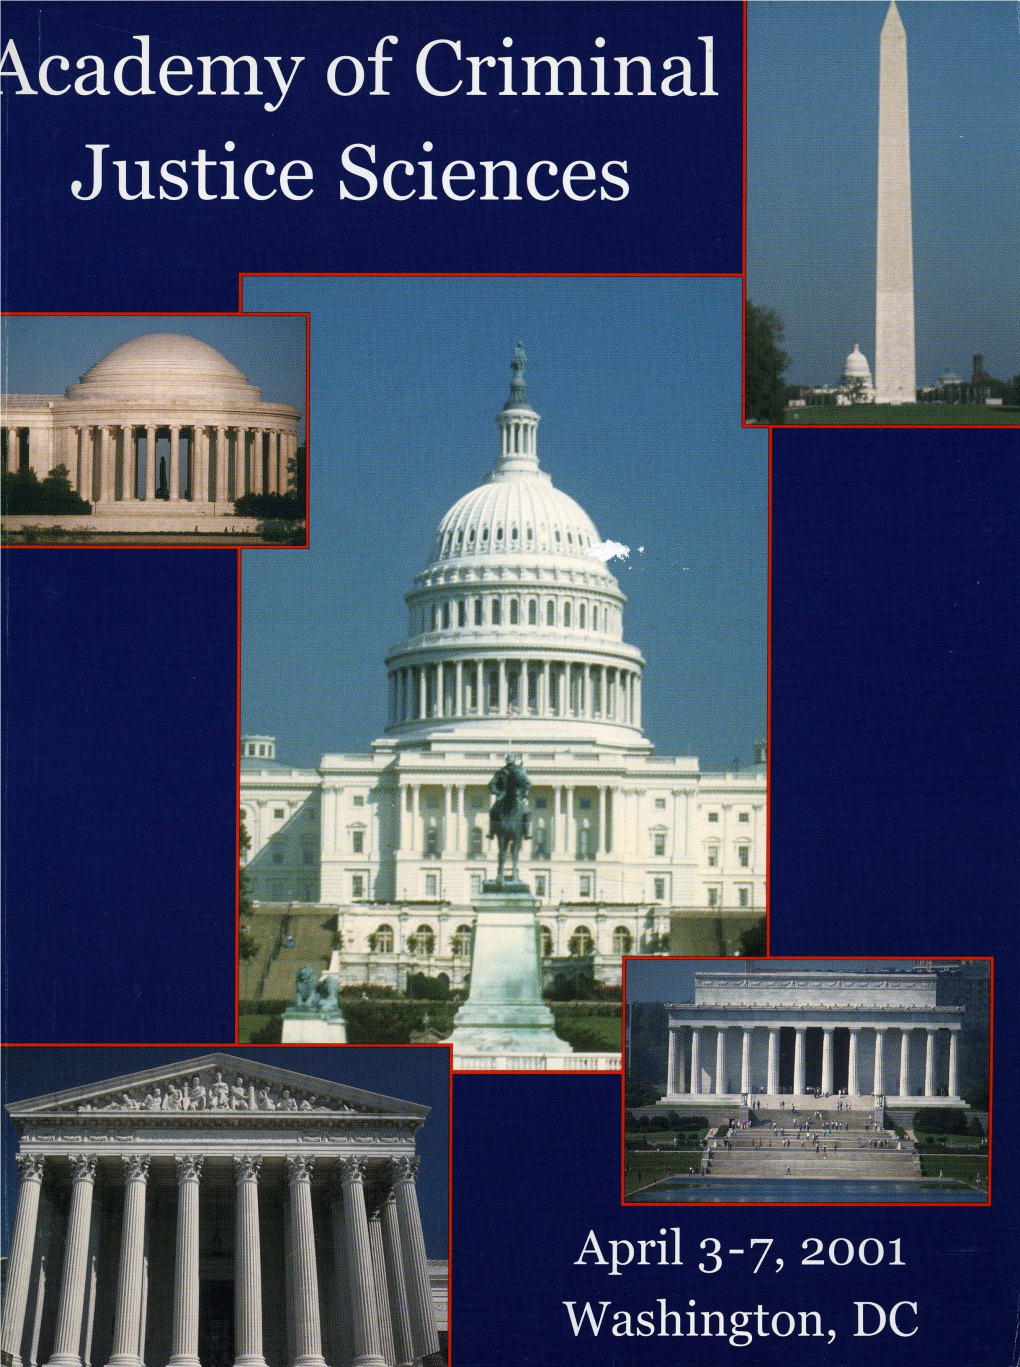 2001 Annual Meeting Program Committee, Welcome to Washington D.C